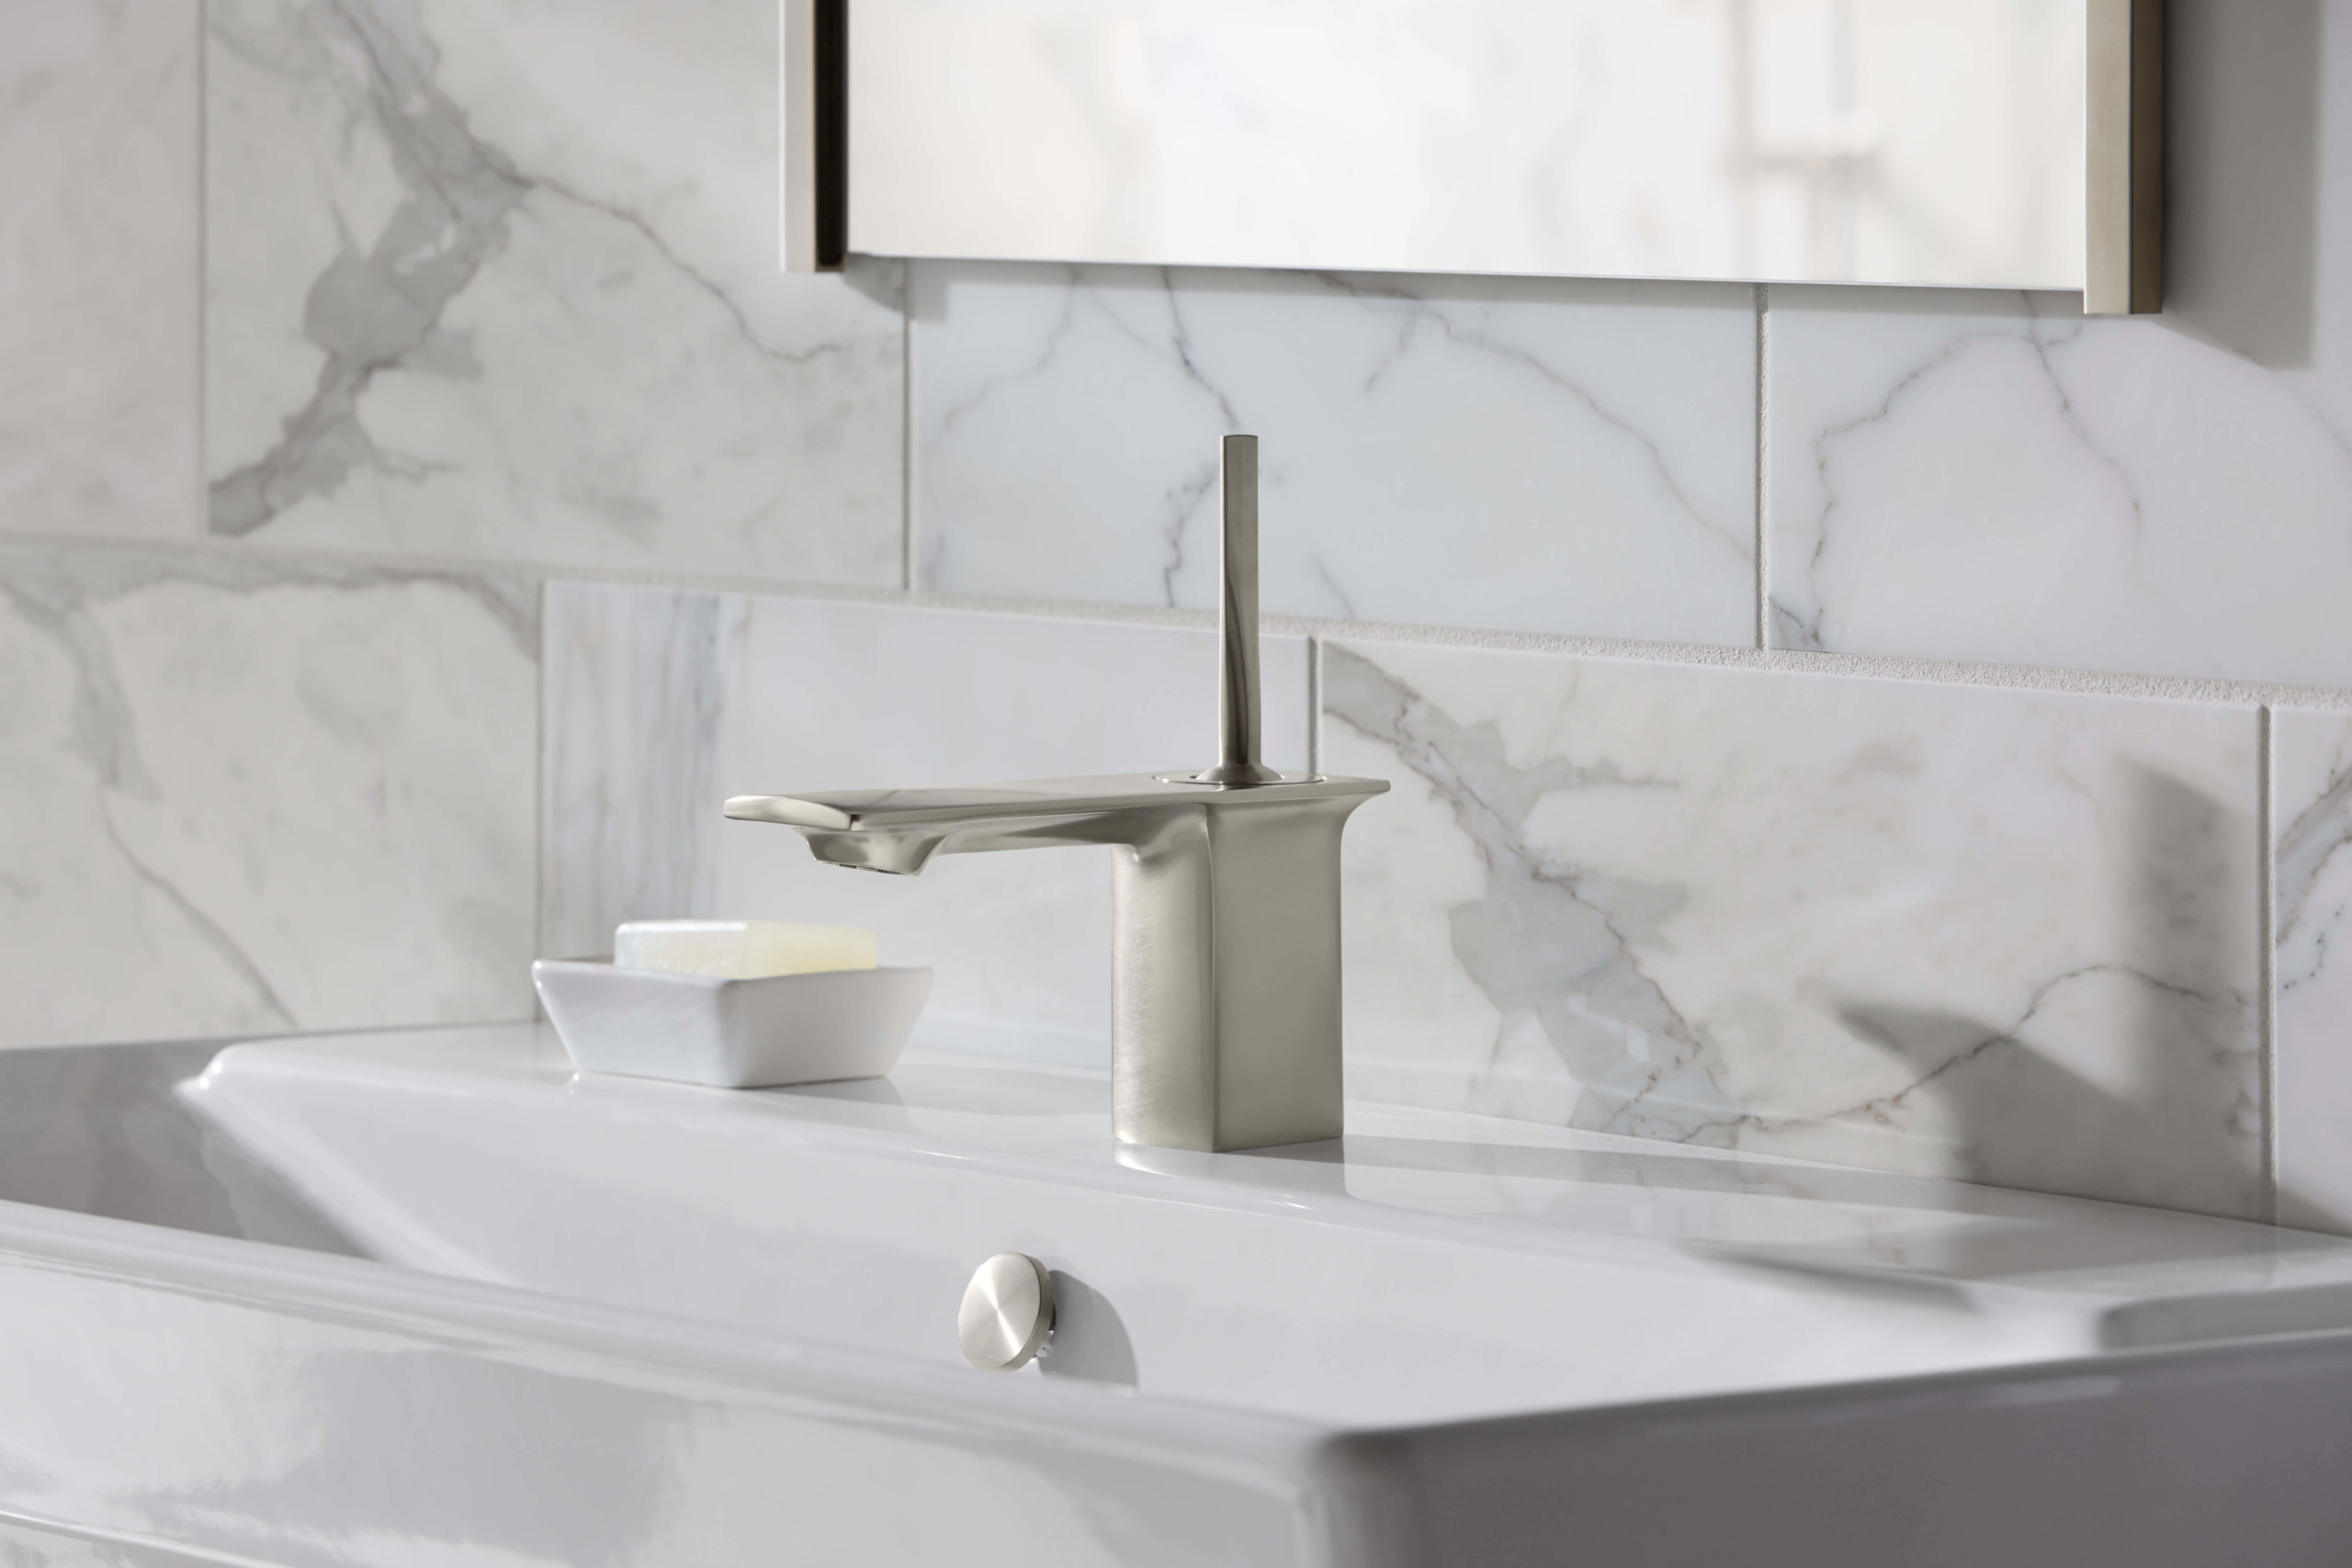 silver faucet with white and gray marble backsplash and walls